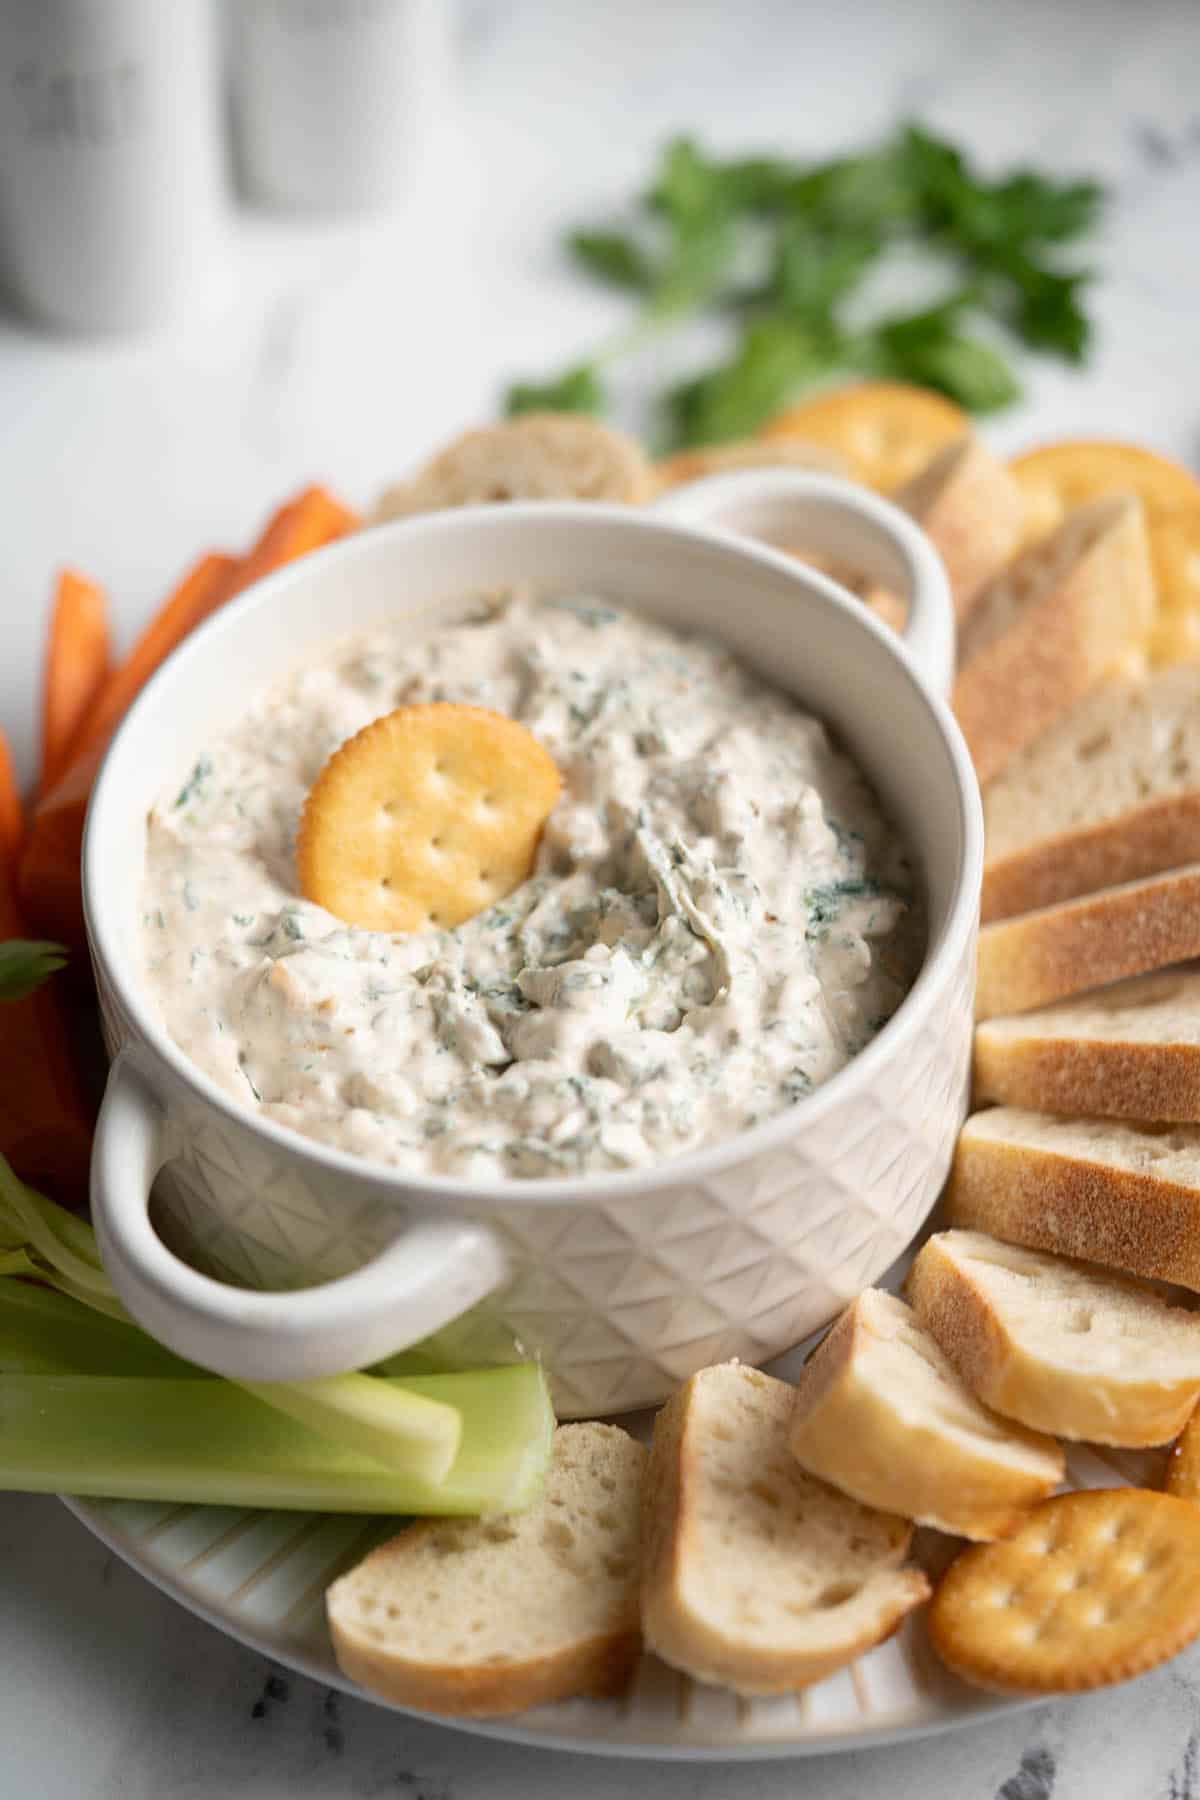 Spinach dip on a plate with bread and crackers for dipping.